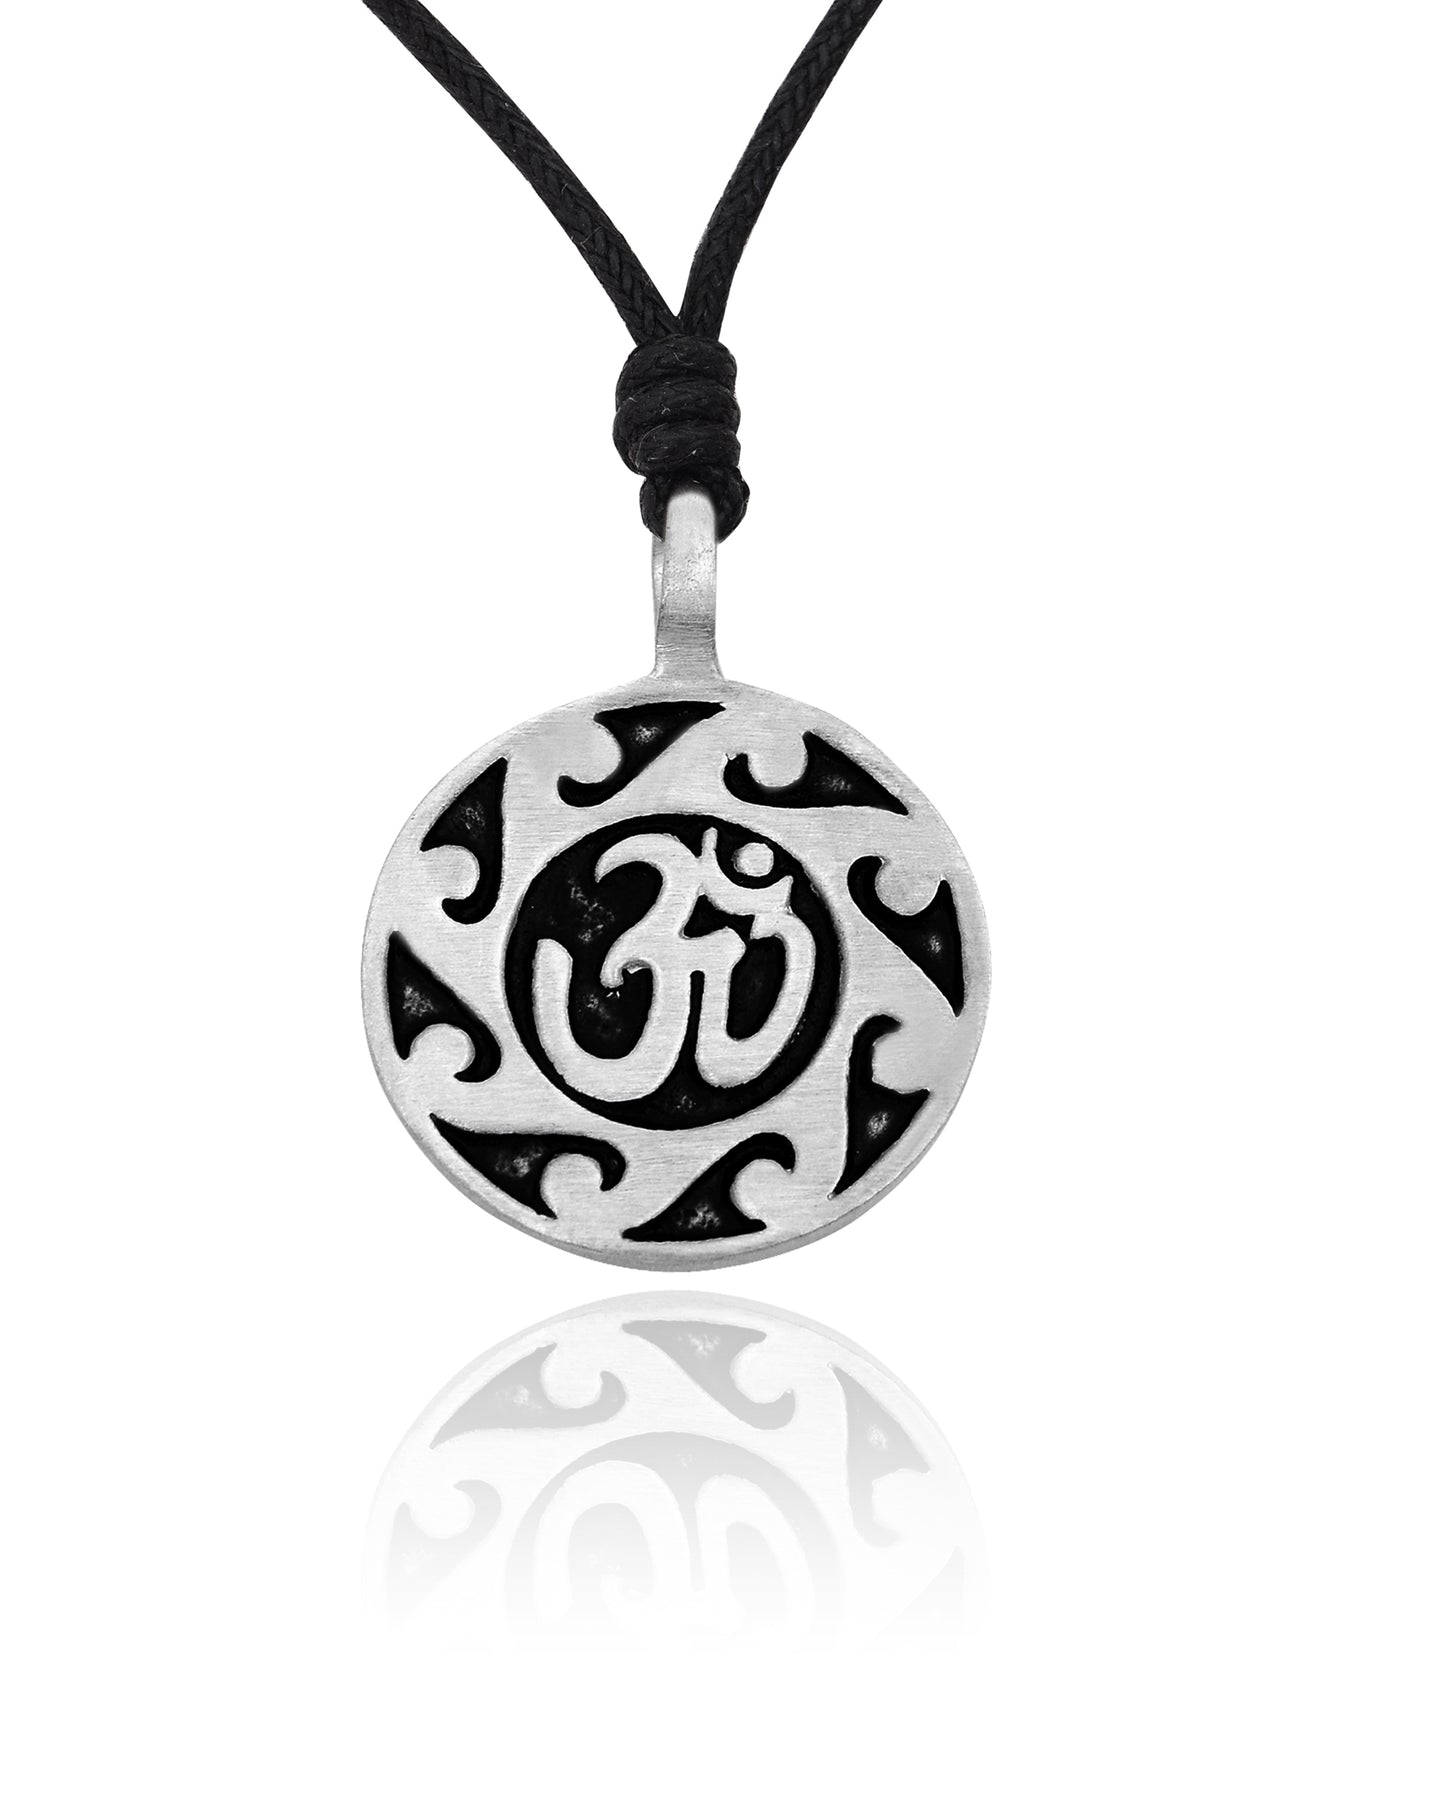 Unique Hindu Symbol Silver Pewter Charm Necklace Pendant Jewelry With Cotton Cord